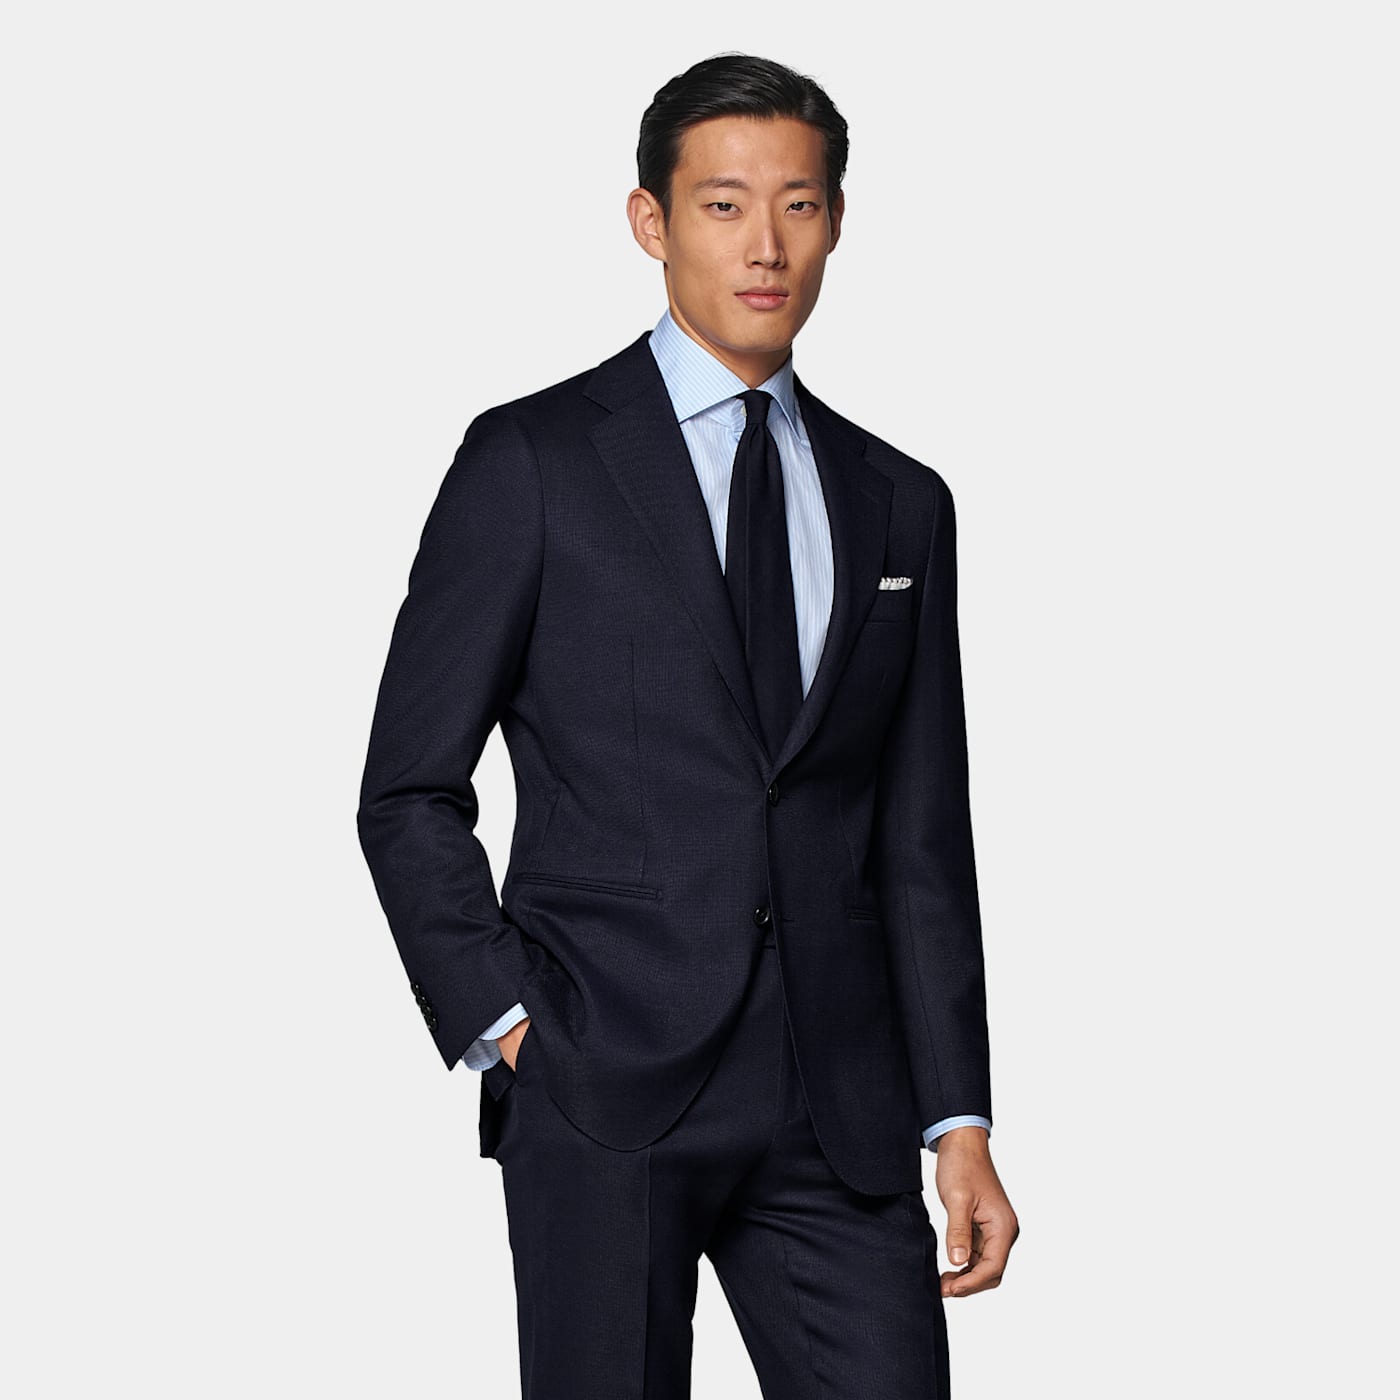 Suitsupply Navy Perennial Tailored Fit Havana Suit In Black